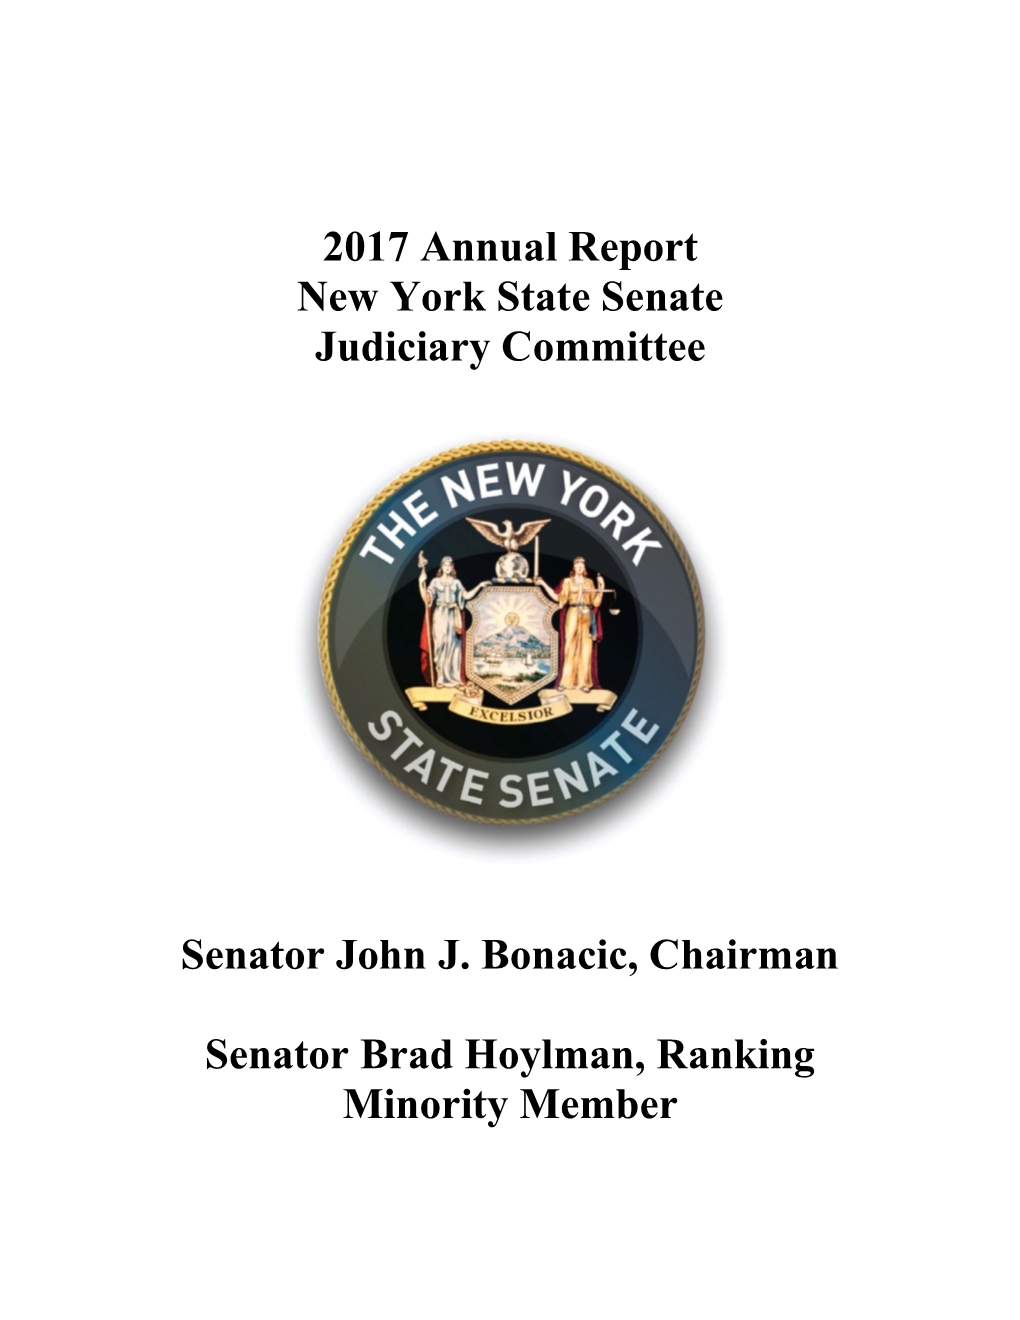 2017 Judiciary Committee Annual Report